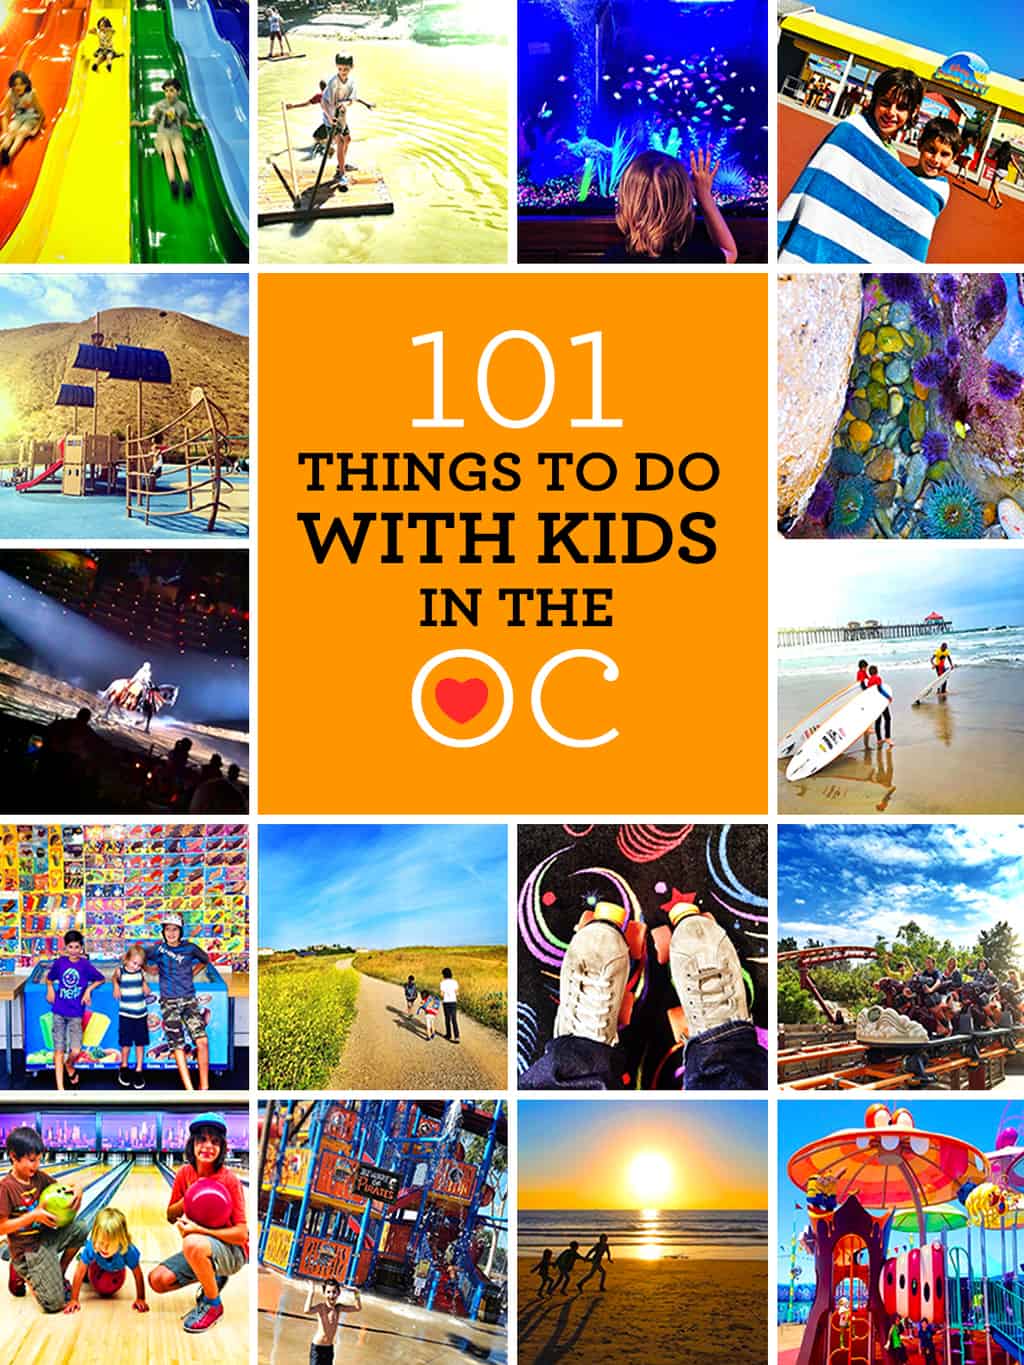 18 Things to do with Kids in Orange County